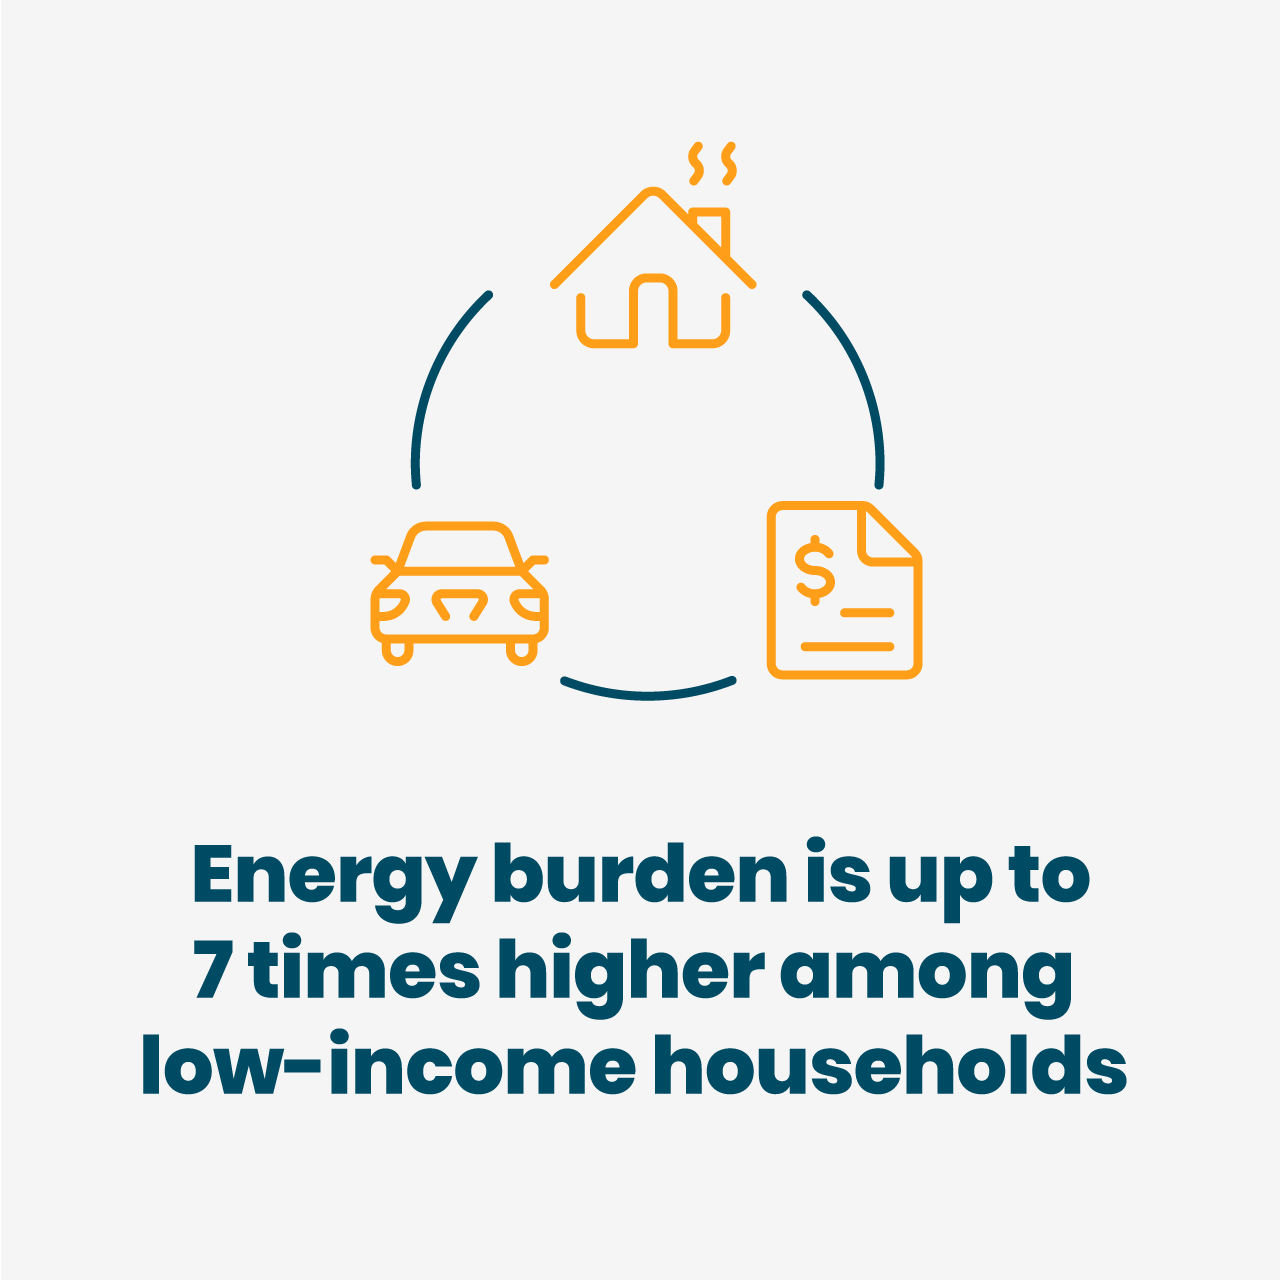 Energy burden is up to 7 times higher among low-income households